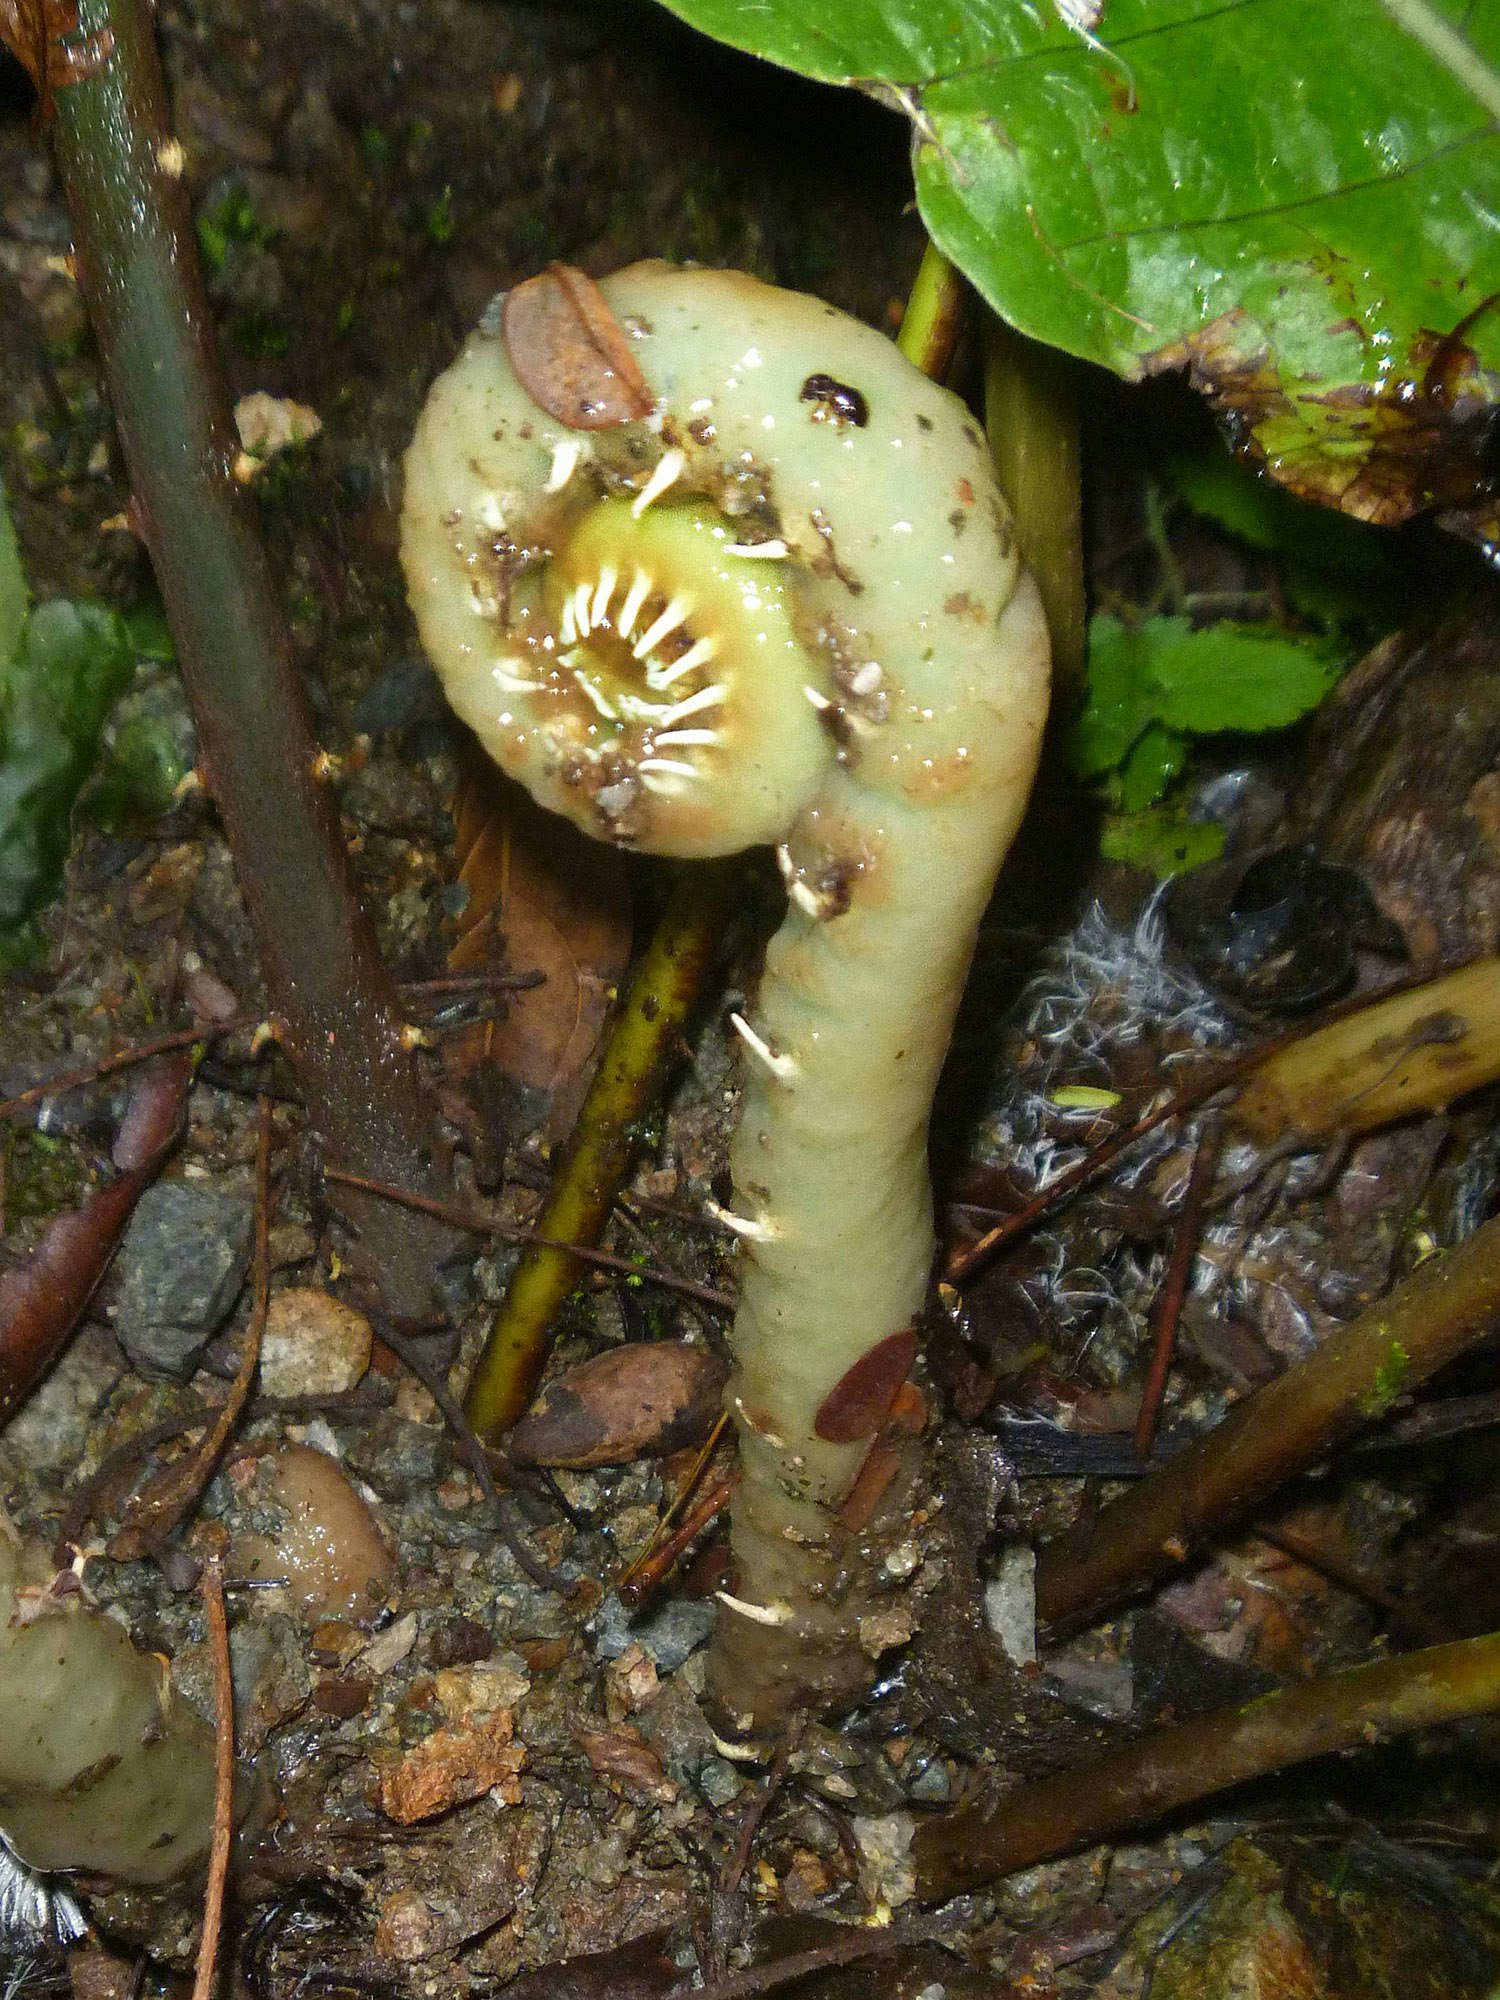 A small, pale green frond growing up from the earth